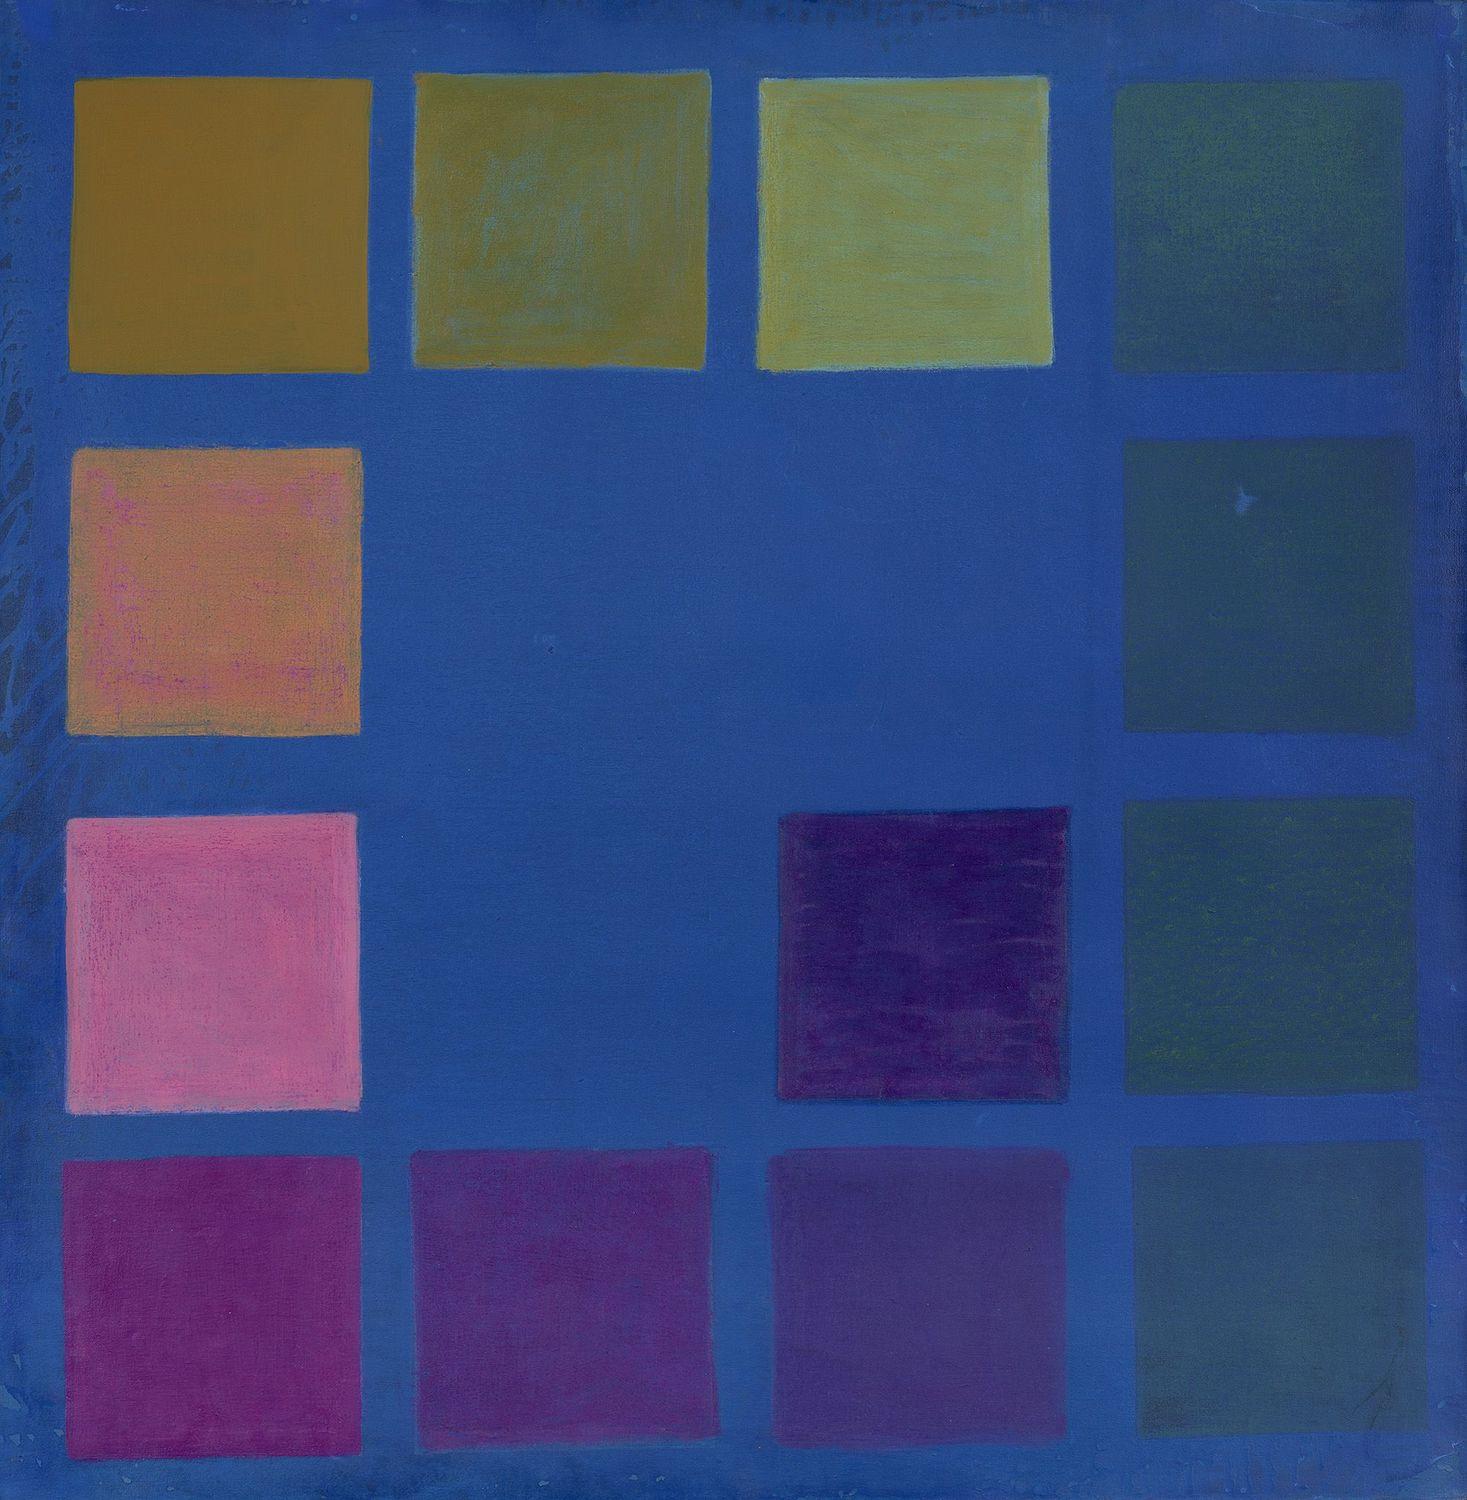 Yvonne Thomas: Complexed Squares  | Yvonne Thomas | Berry Campbell